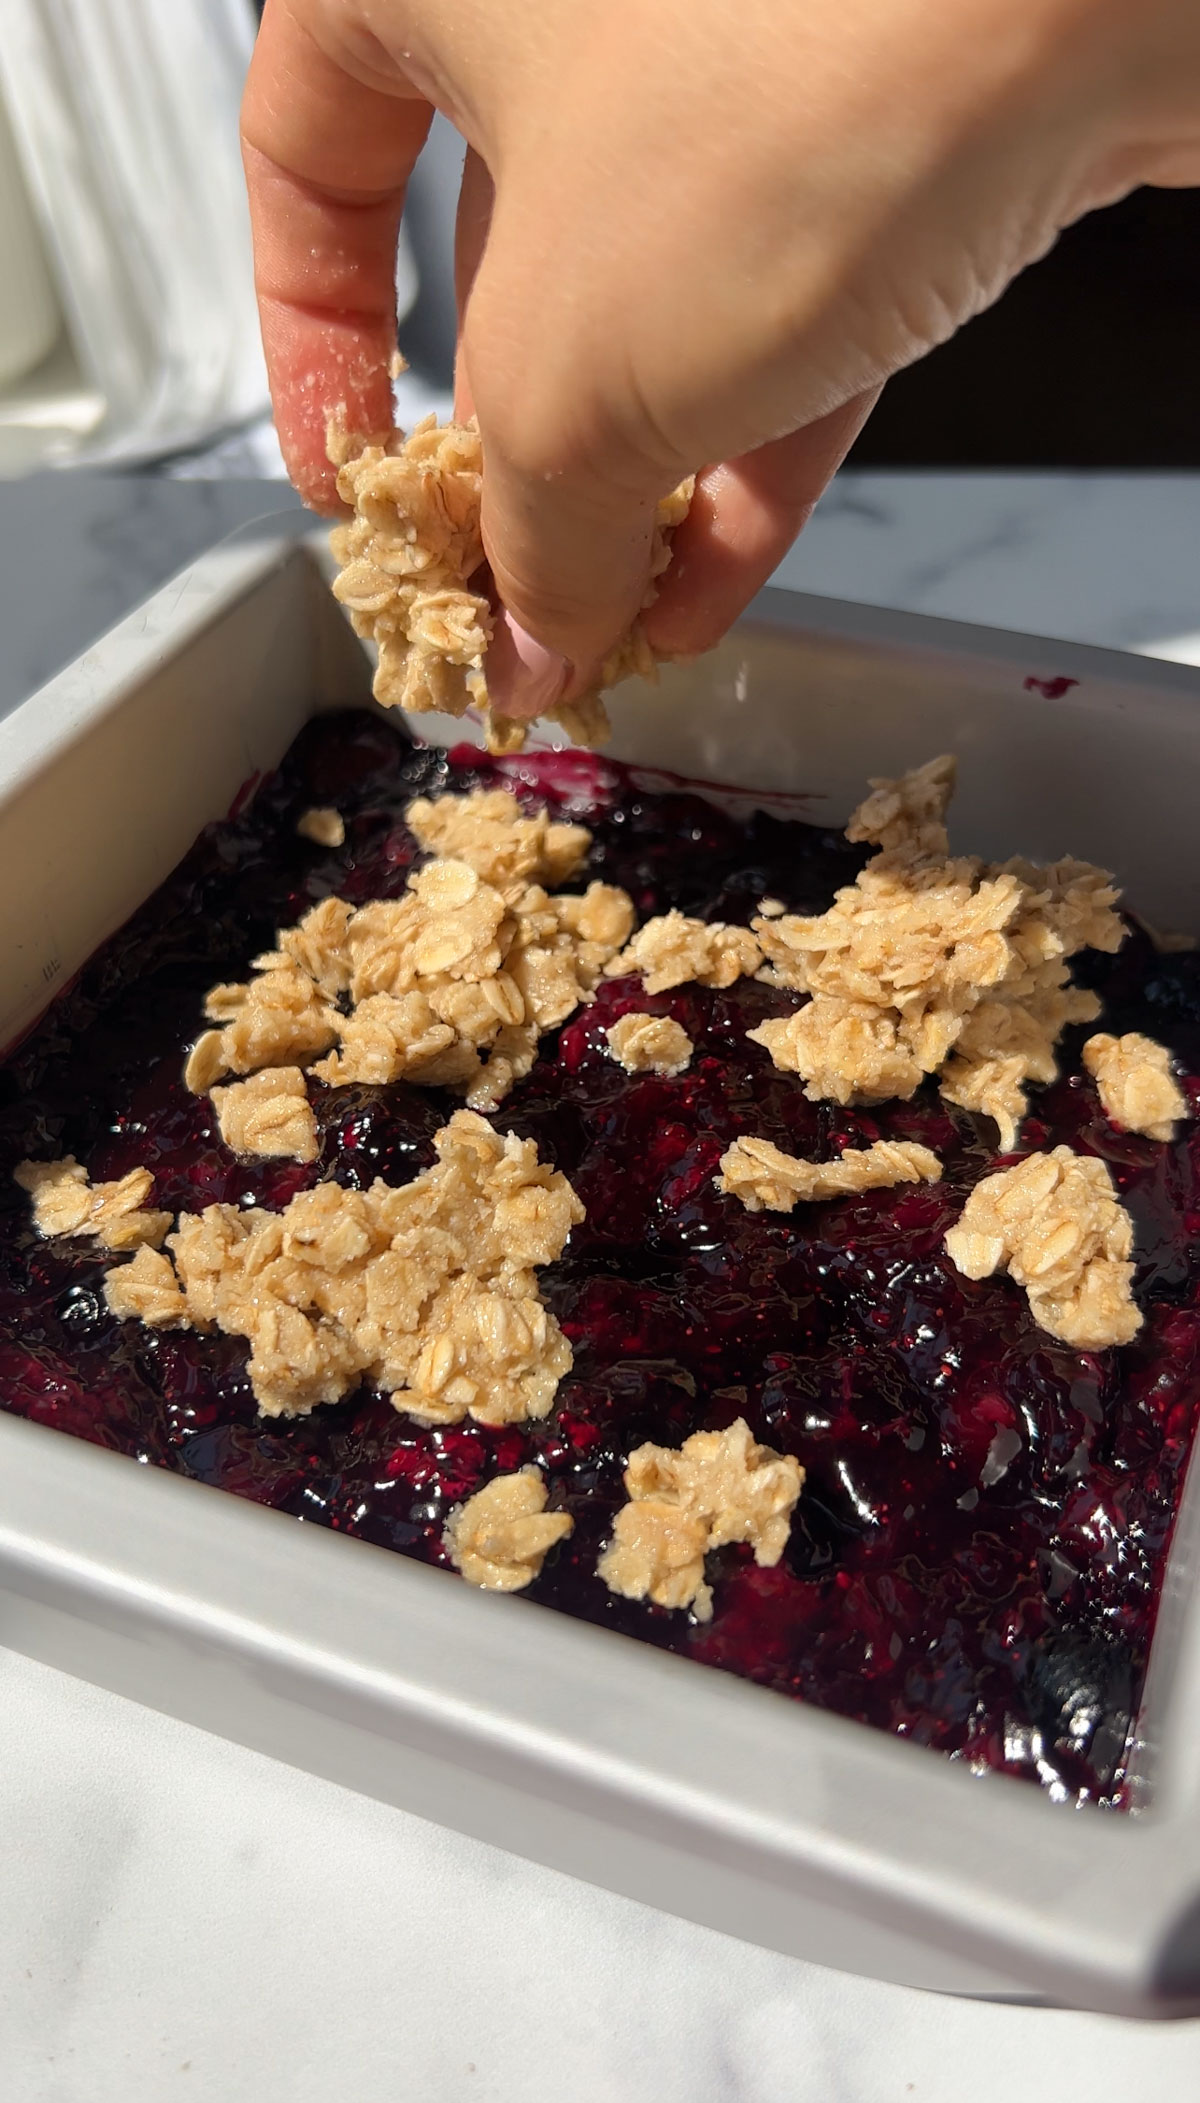 Adding the oatmeal mixture to the top of the blueberry crumble bars.